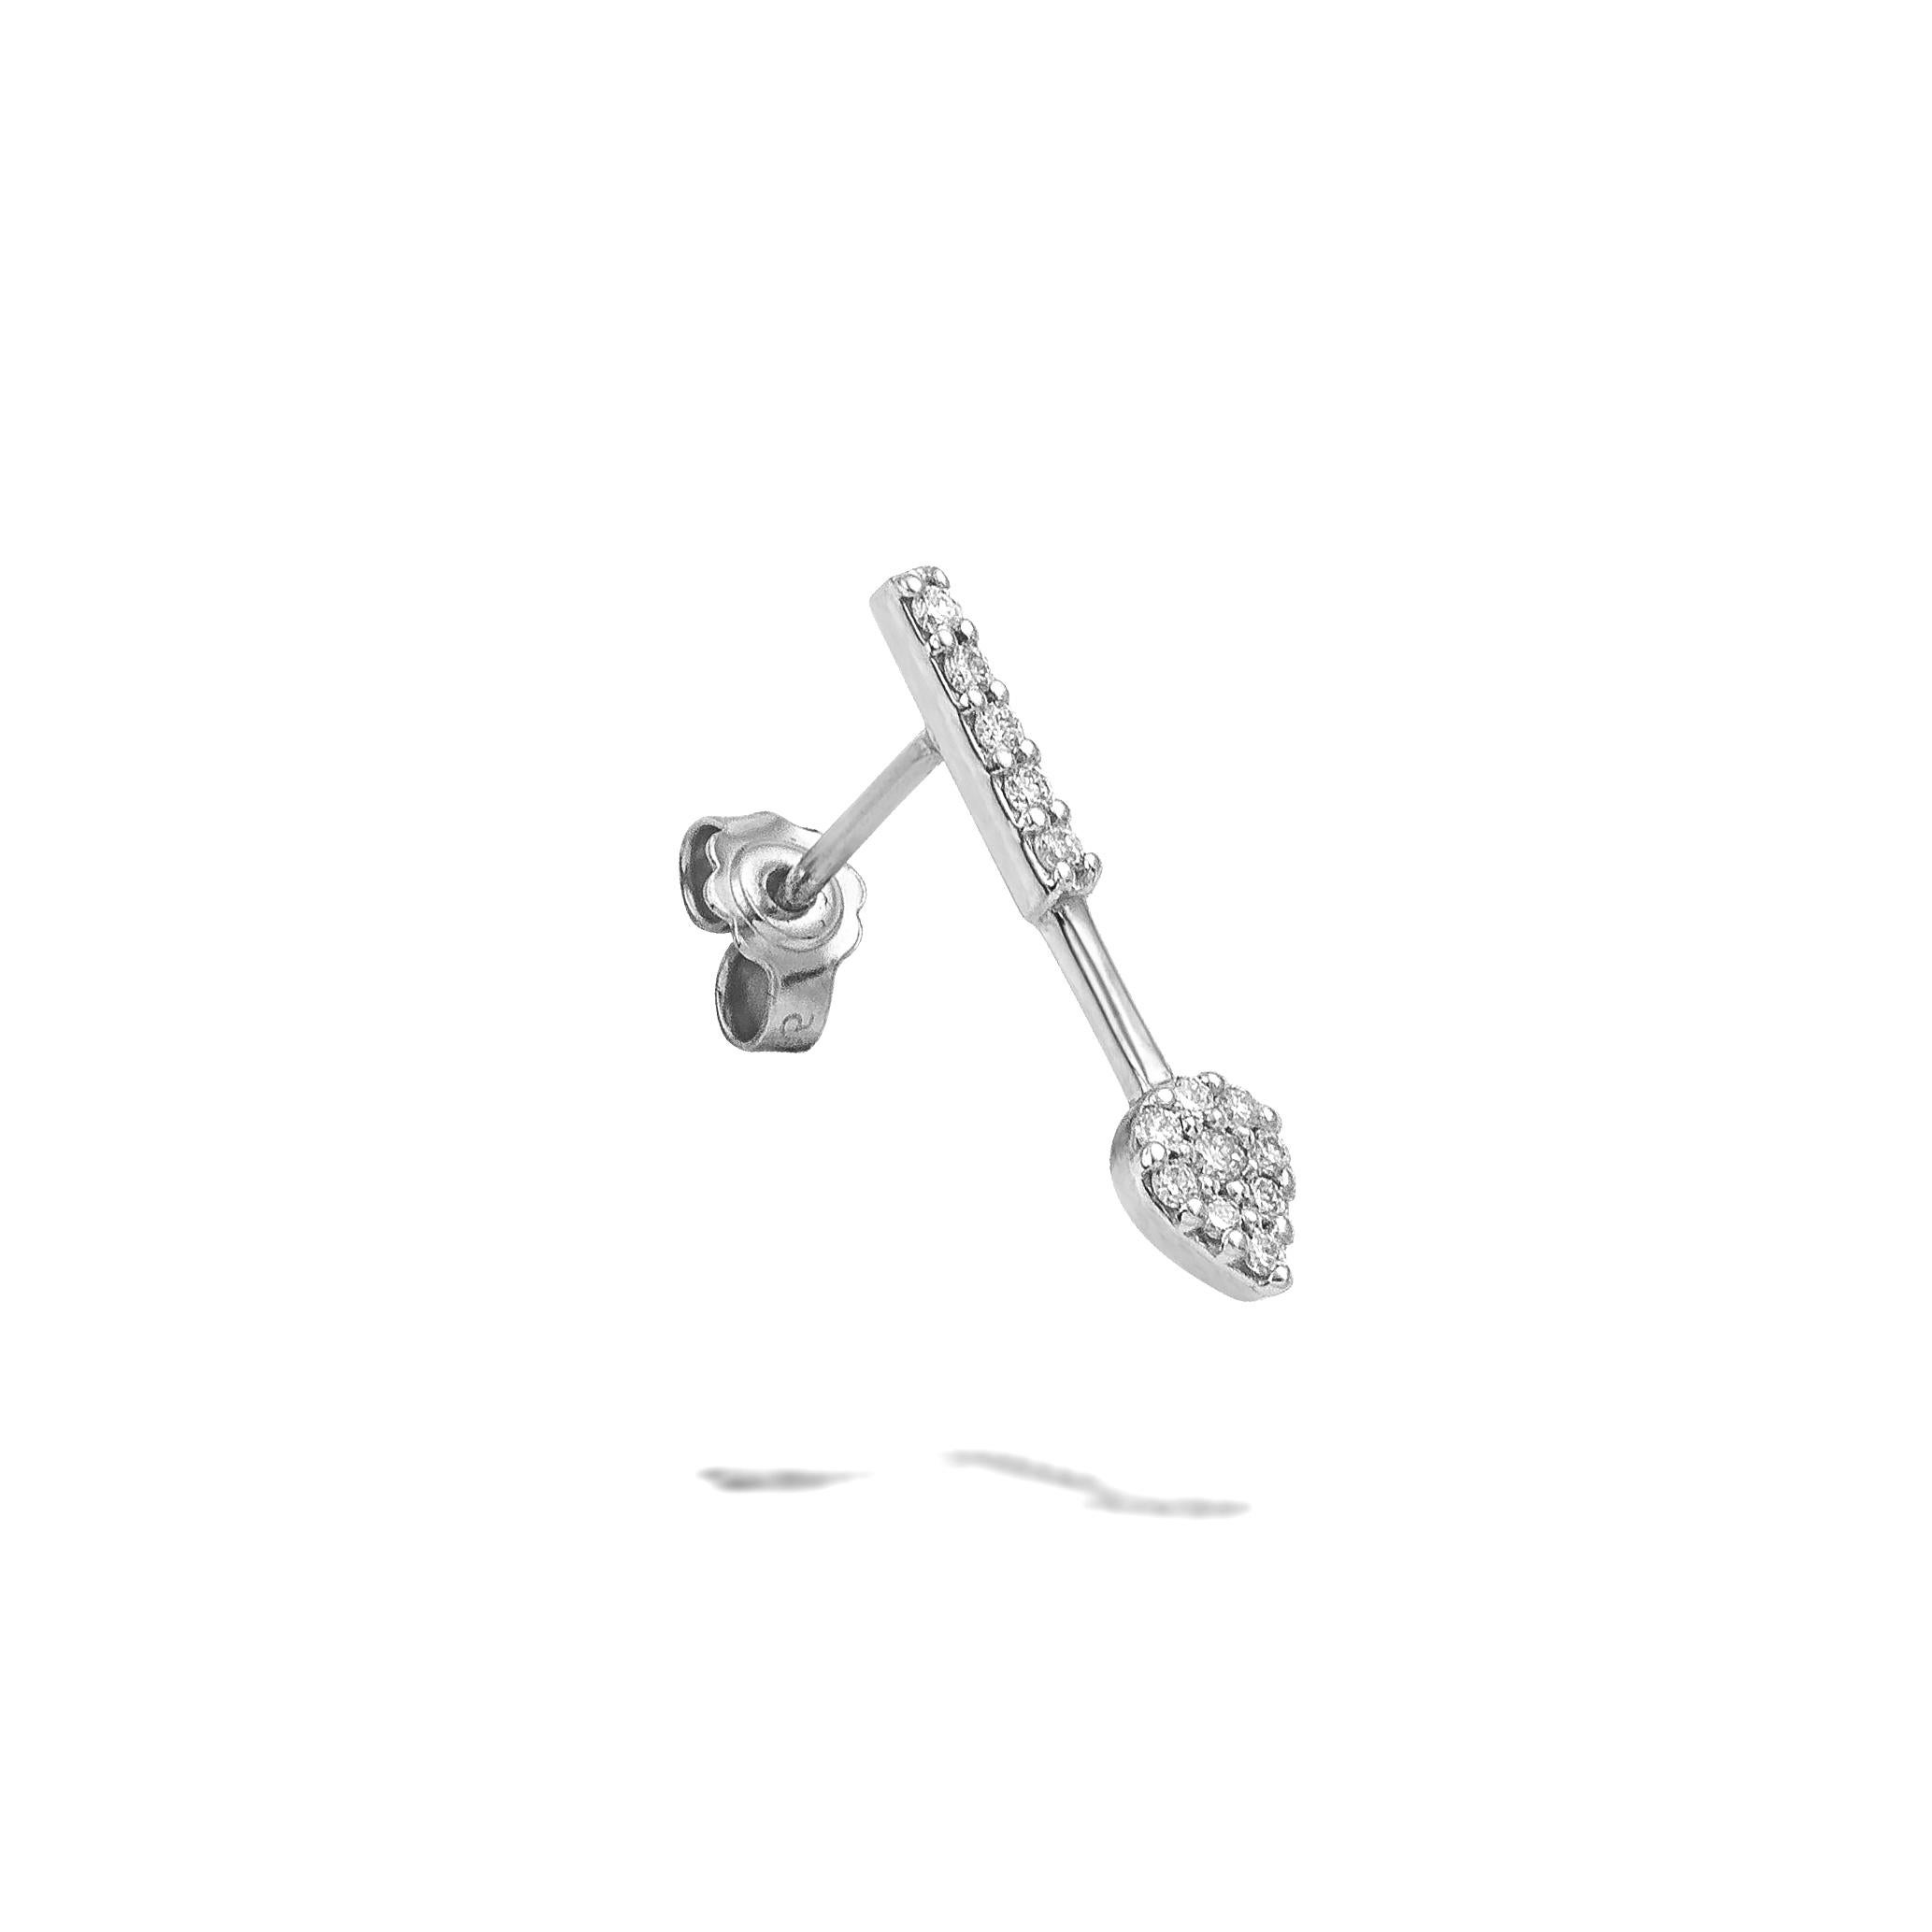 Recycled 14K White Gold

Diamonds Approx. 0.13 ct

Single Floating Pear Diamond Earring in White Gold and Diamonds

This collection combines the simplicity of the single piece with the opulence of diamonds.

All jewels in the Essentials – Mix &